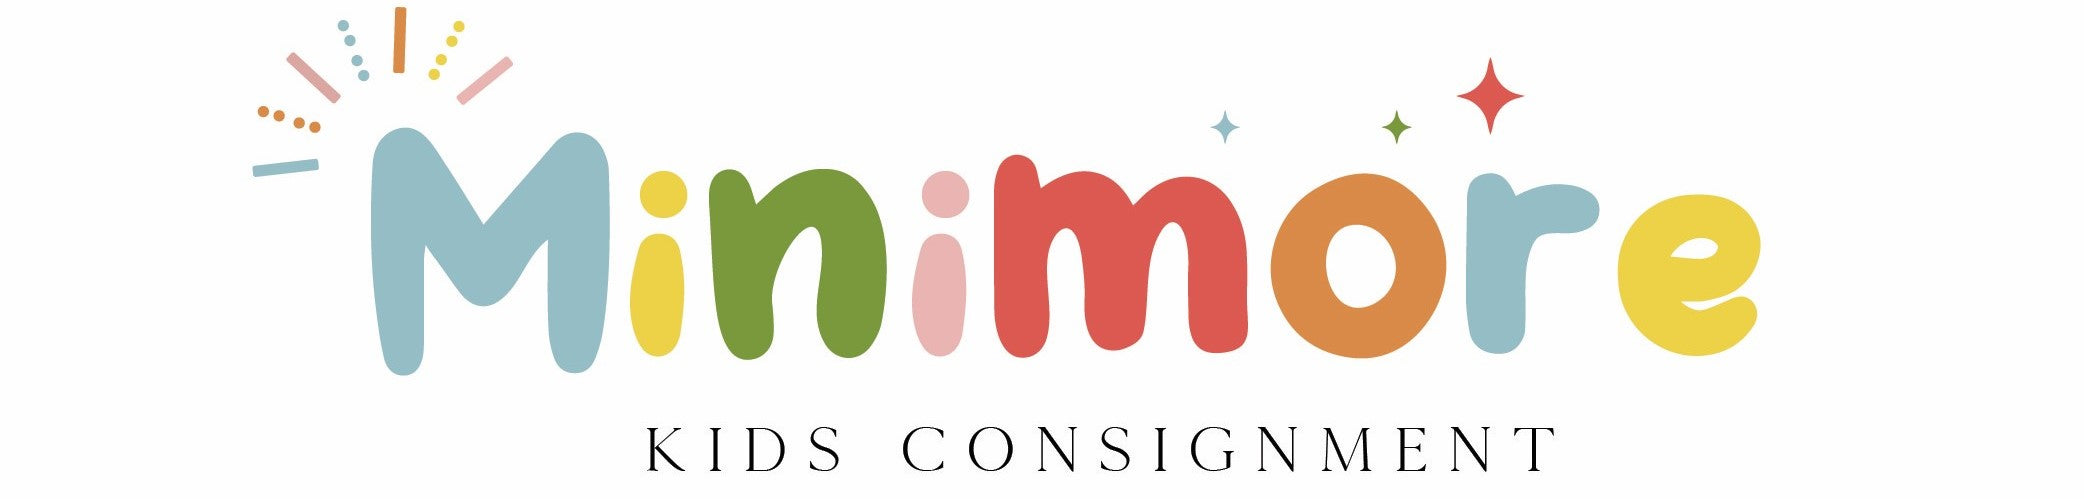 Minimore Kids Consignment